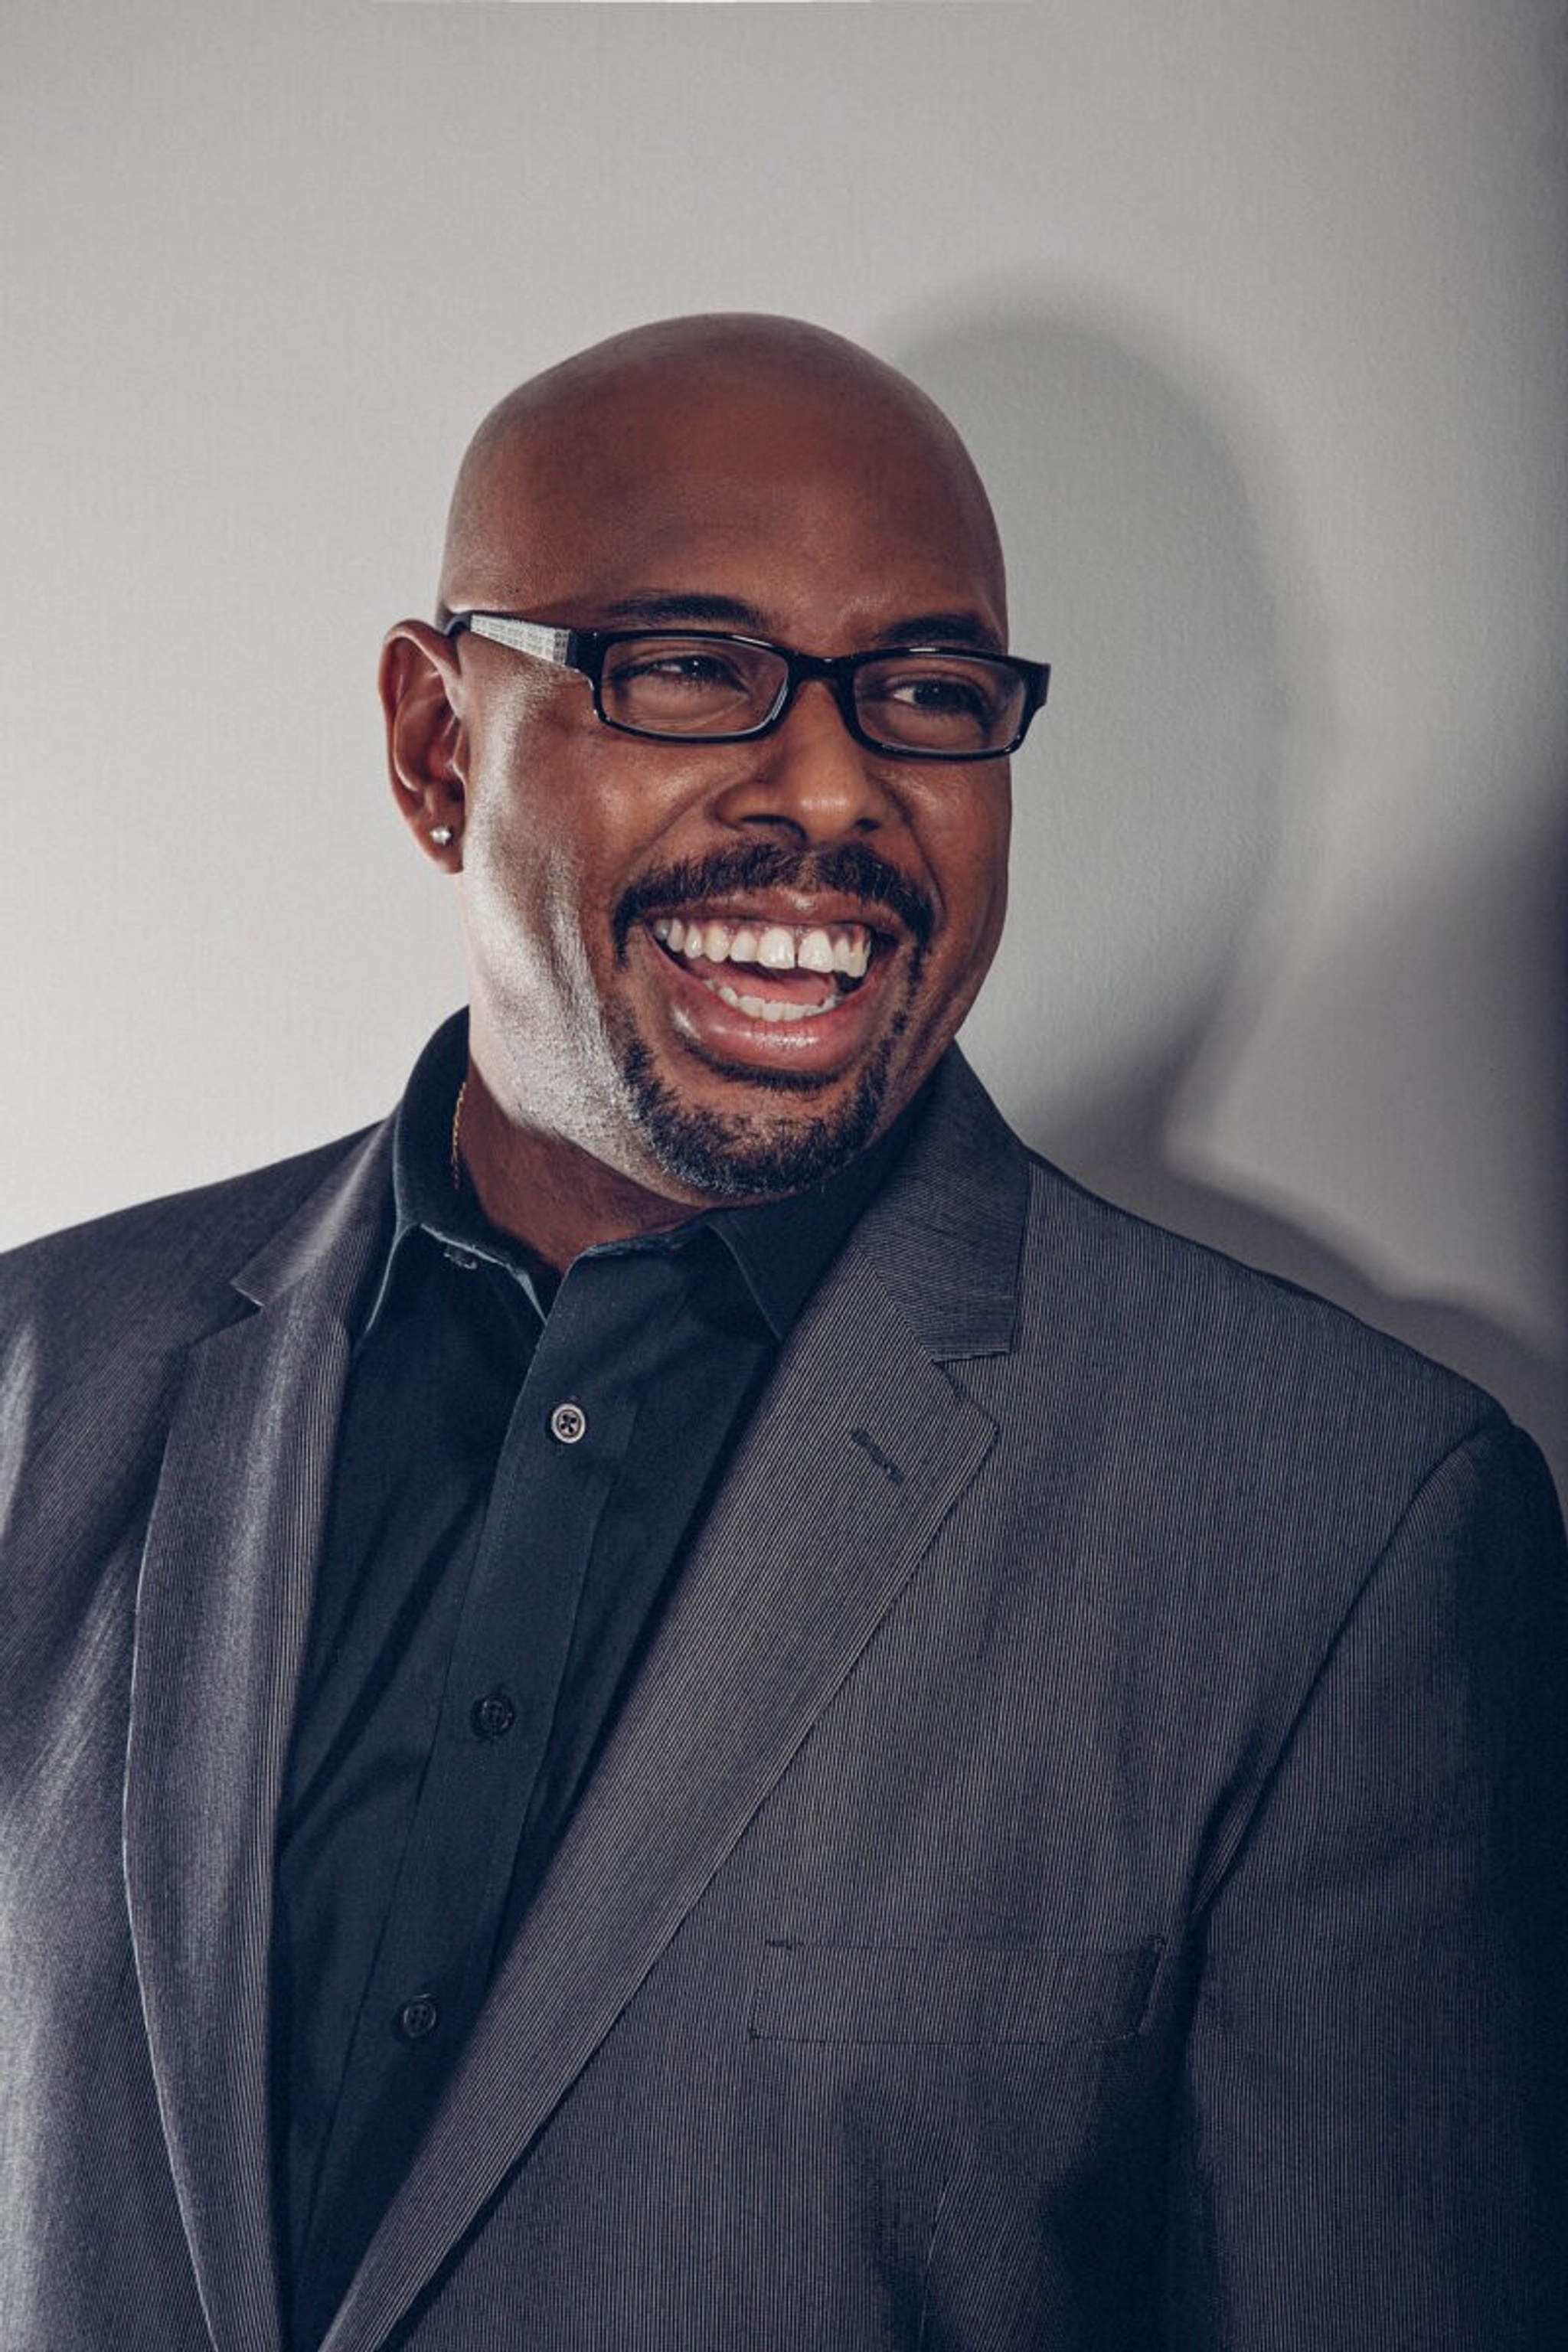 Musician Christian McBride stands smiling against a gray wall where his shadow is cast. He has a bald head and wears a dark gray suit, a dark shirt, and glasses. 